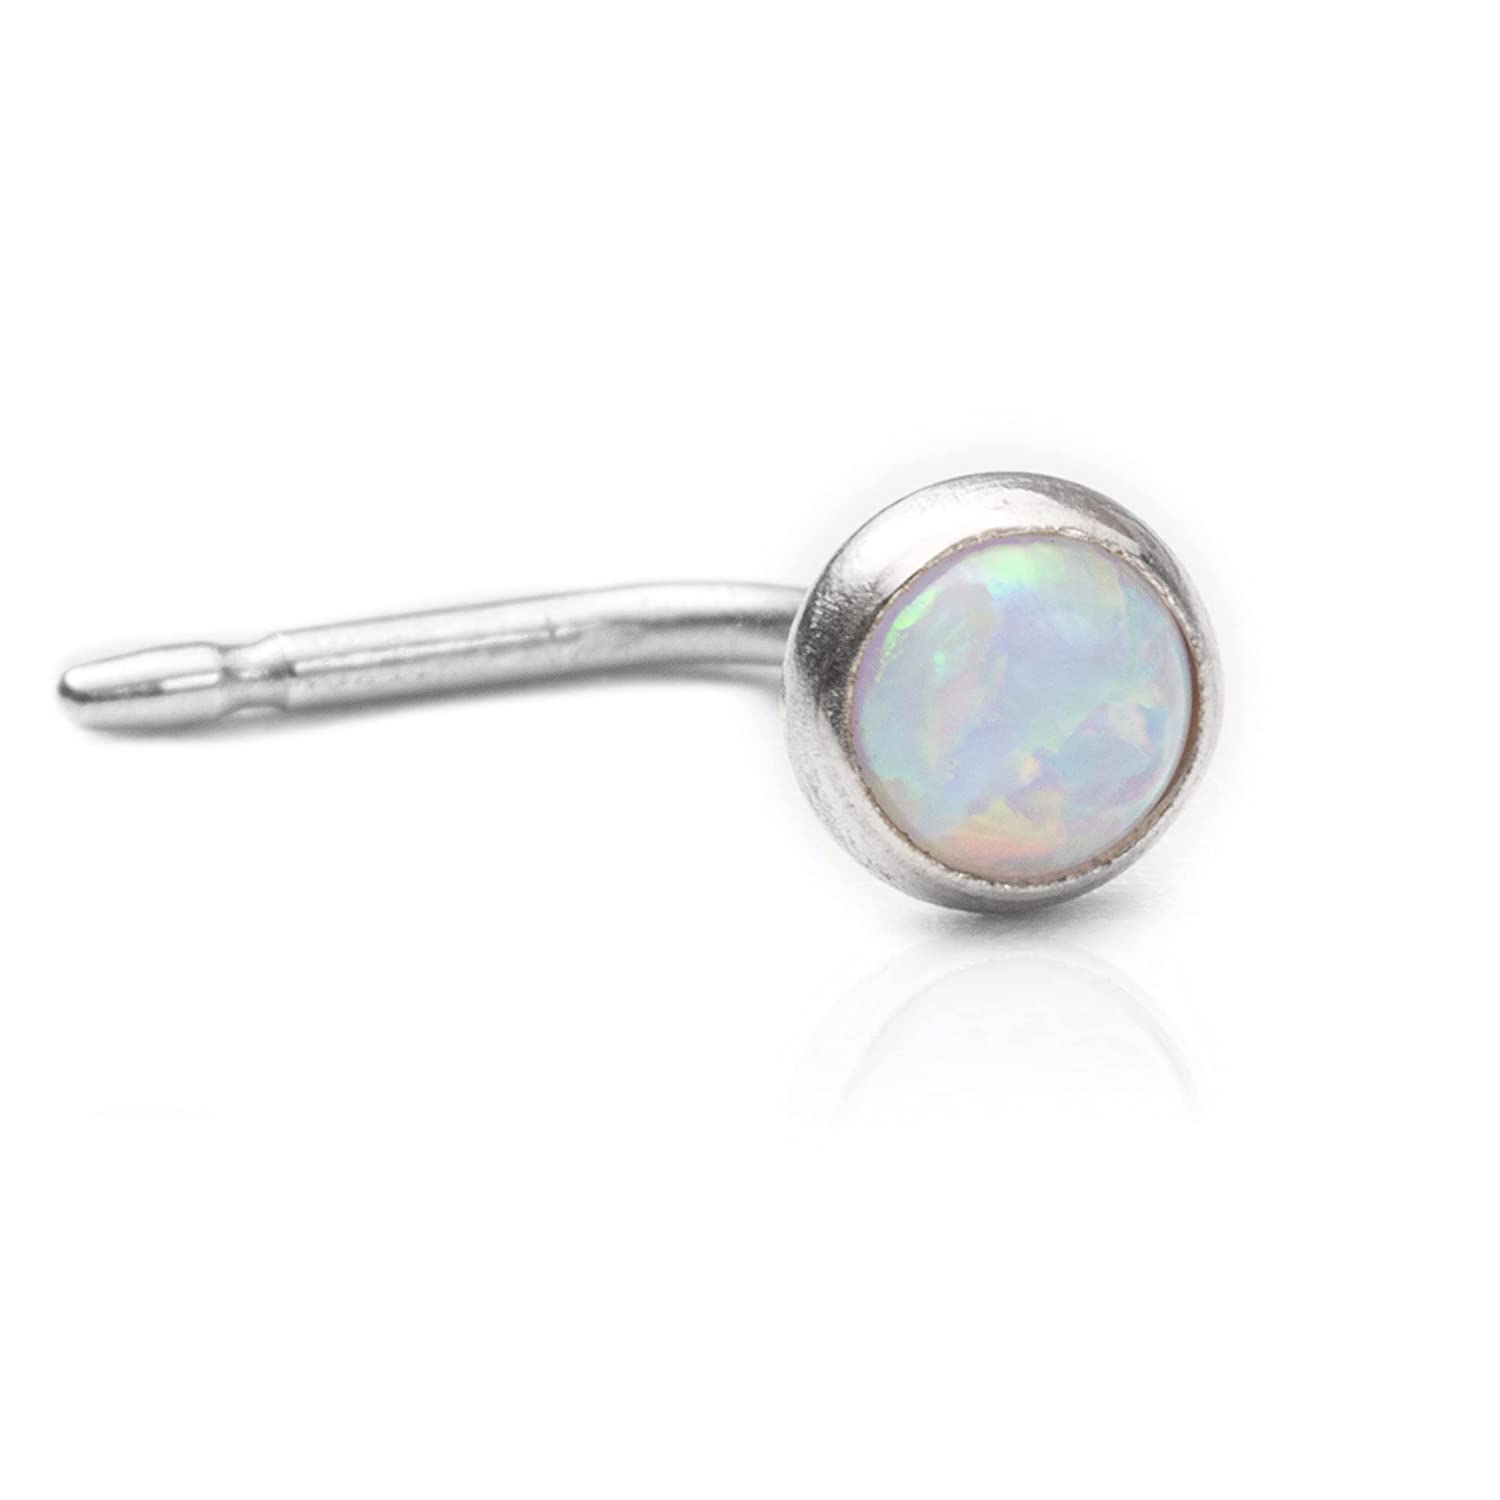 3mm White Fire Opal Nose Ring L Shaped Stud or Left/Right Screw 925 Solid Sterling Silver